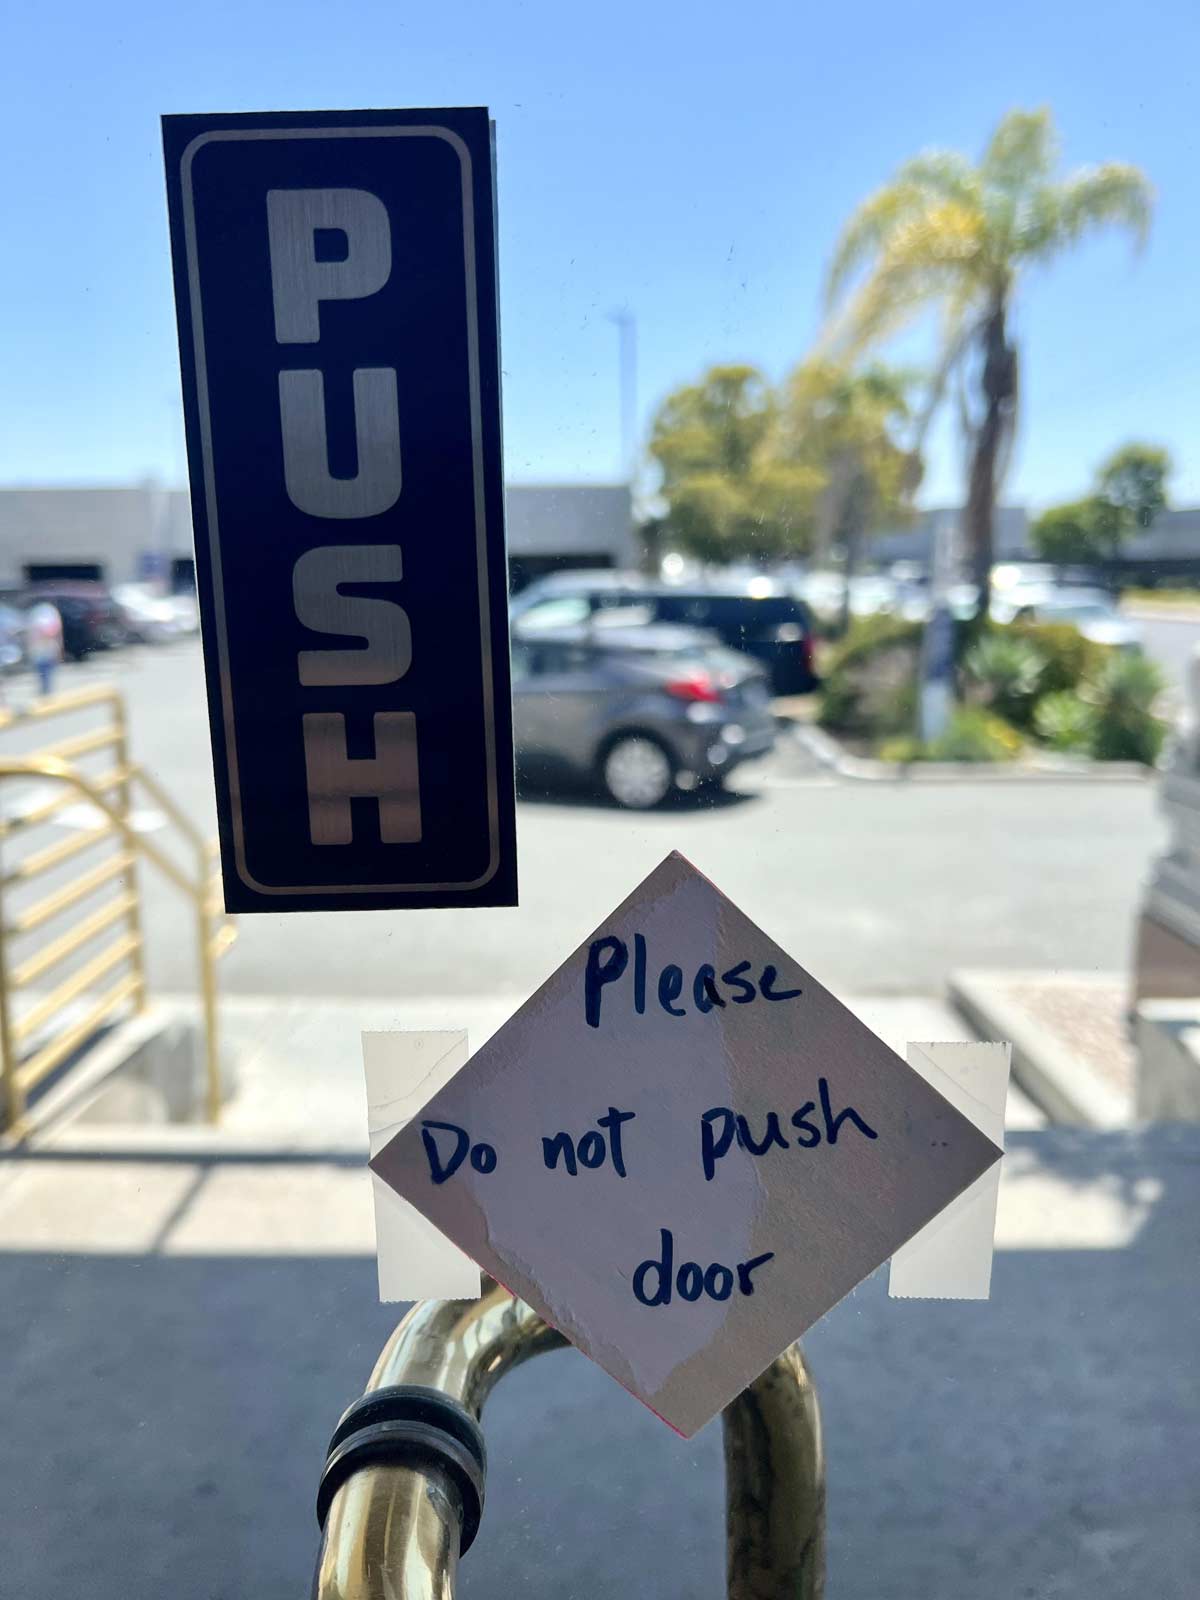 To push or not to push, that is the question